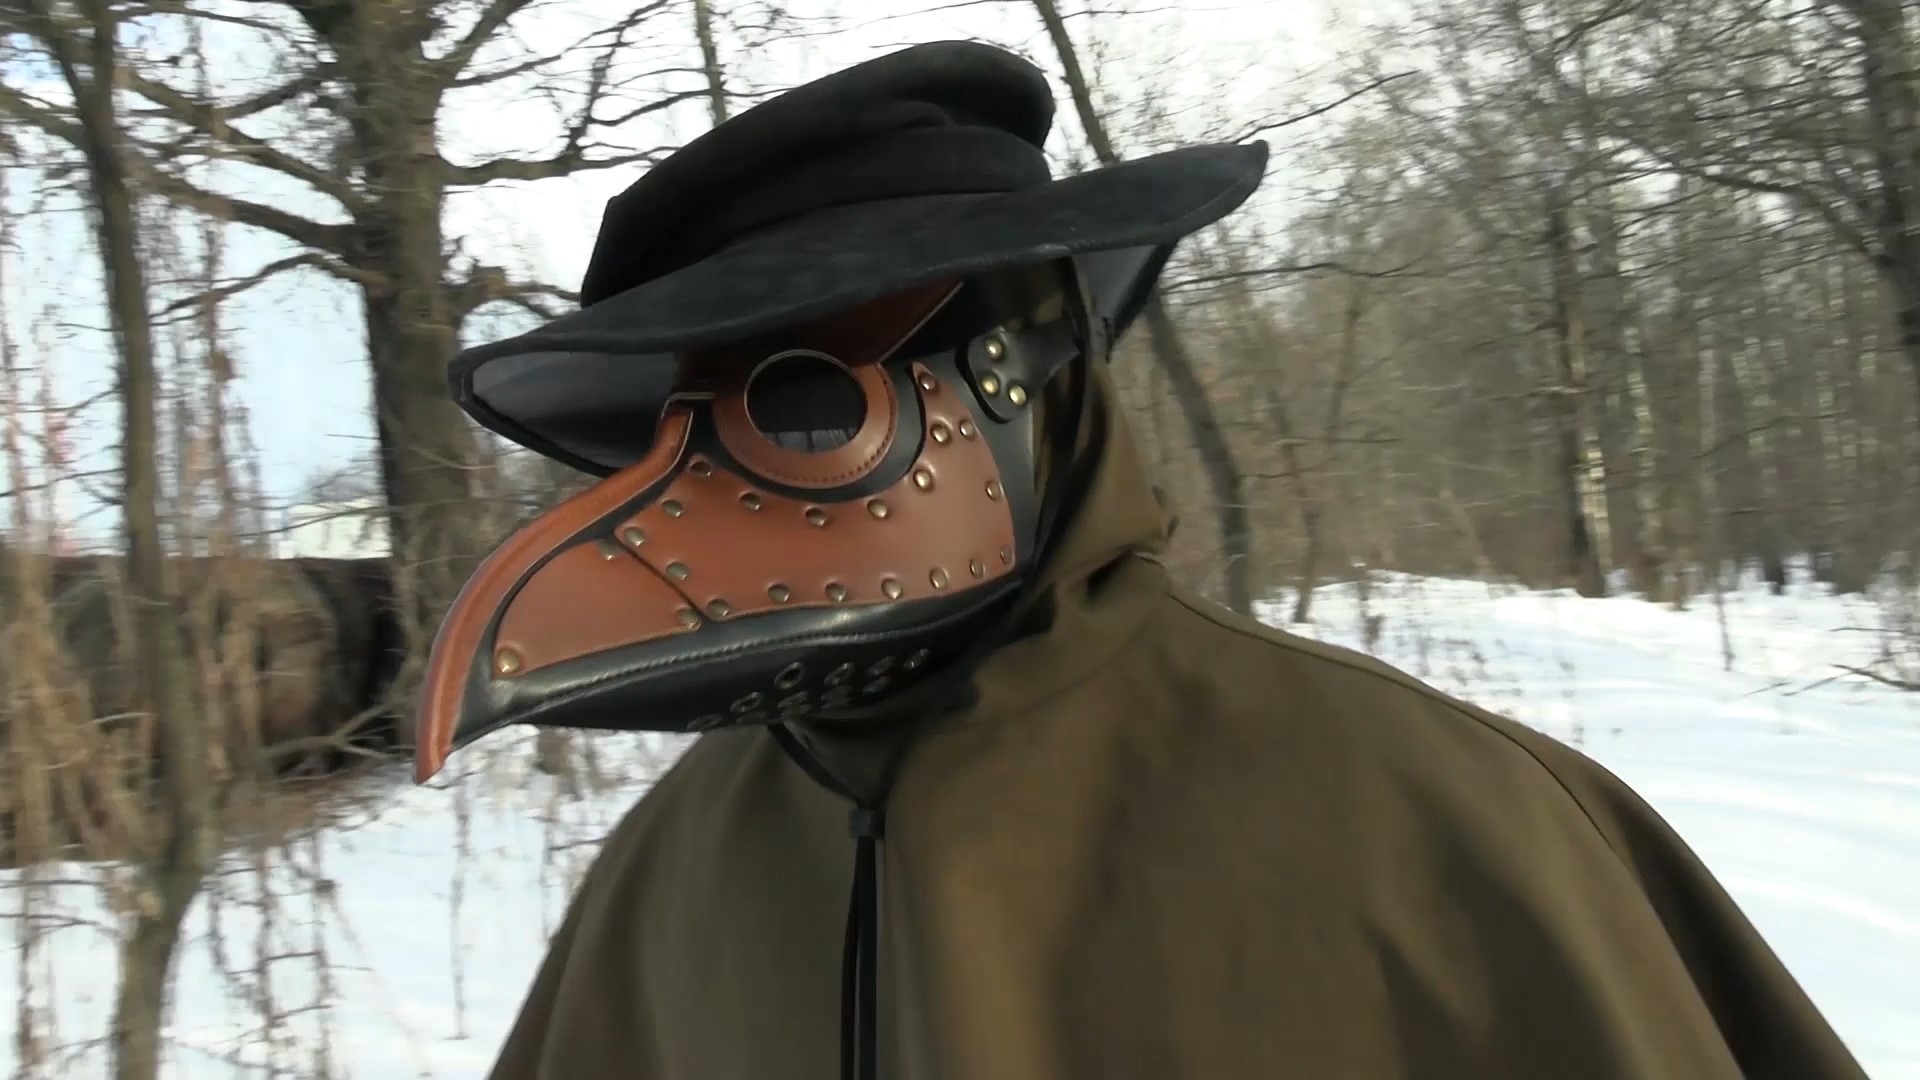 Plague Doctor Goodslof in the movie Major Drone and plague doctor - My, Cosplay, Actors and actresses, The photo, Mask, Major Thunder, Major Thunder: Plague Doctor, Cosplayers, Plague Doctor, Frame, Movies, Russian cinema, Russia, Plague, Parody, Costume, Video, Longpost